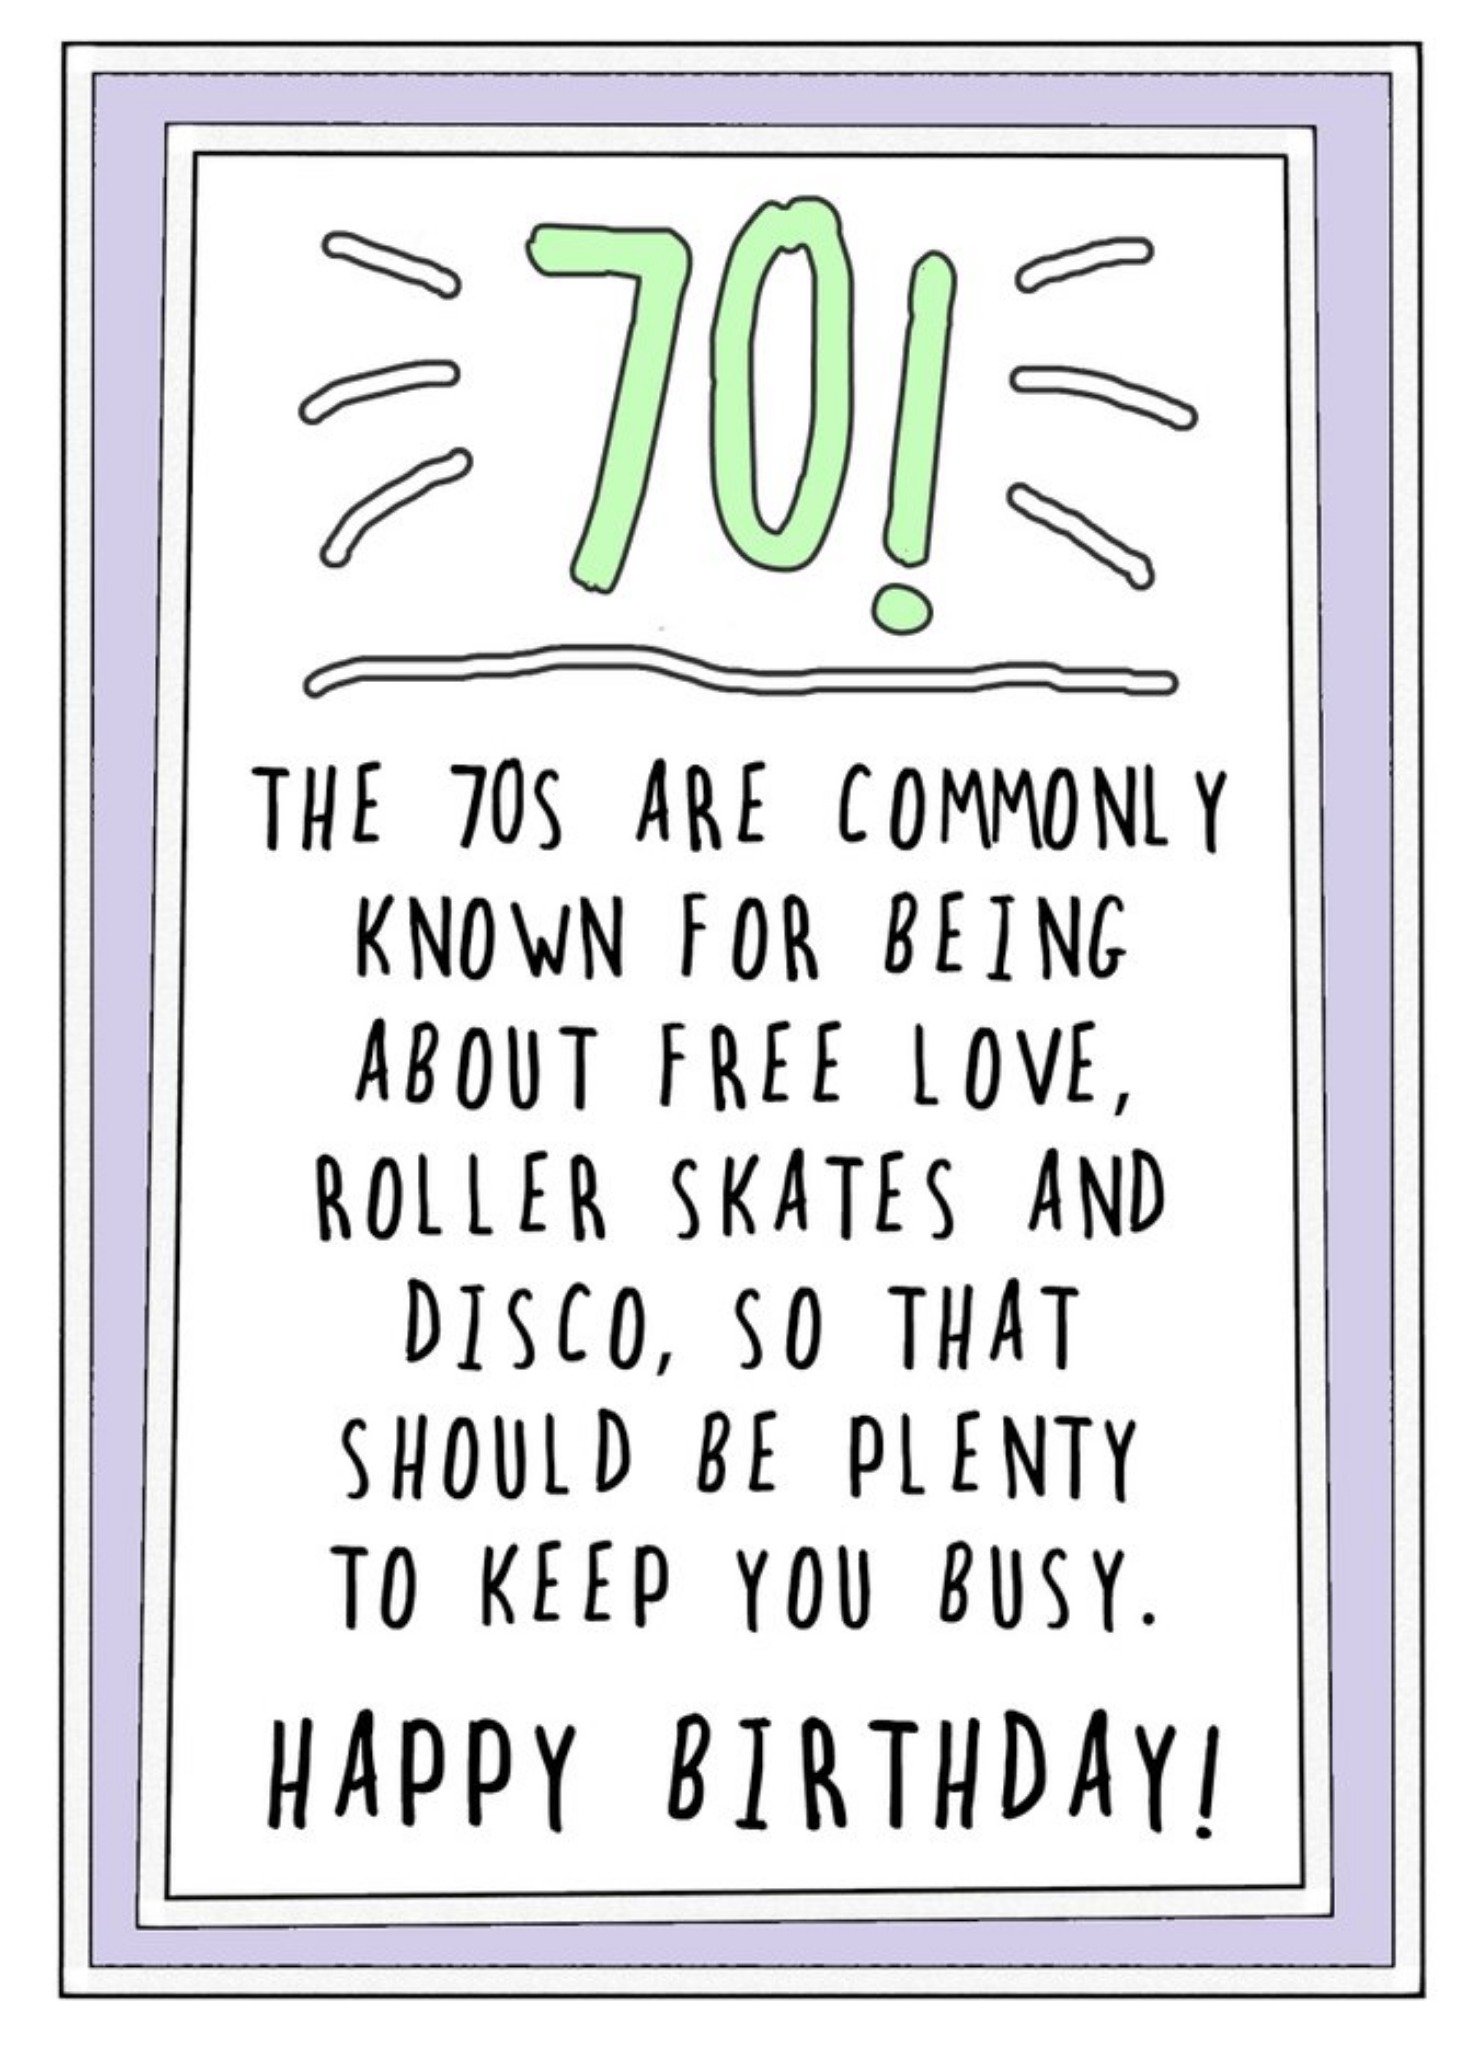 Go La La Funny The 70S Were Known For Being About Free Love, Roller Skates And Disco Birthday Card E